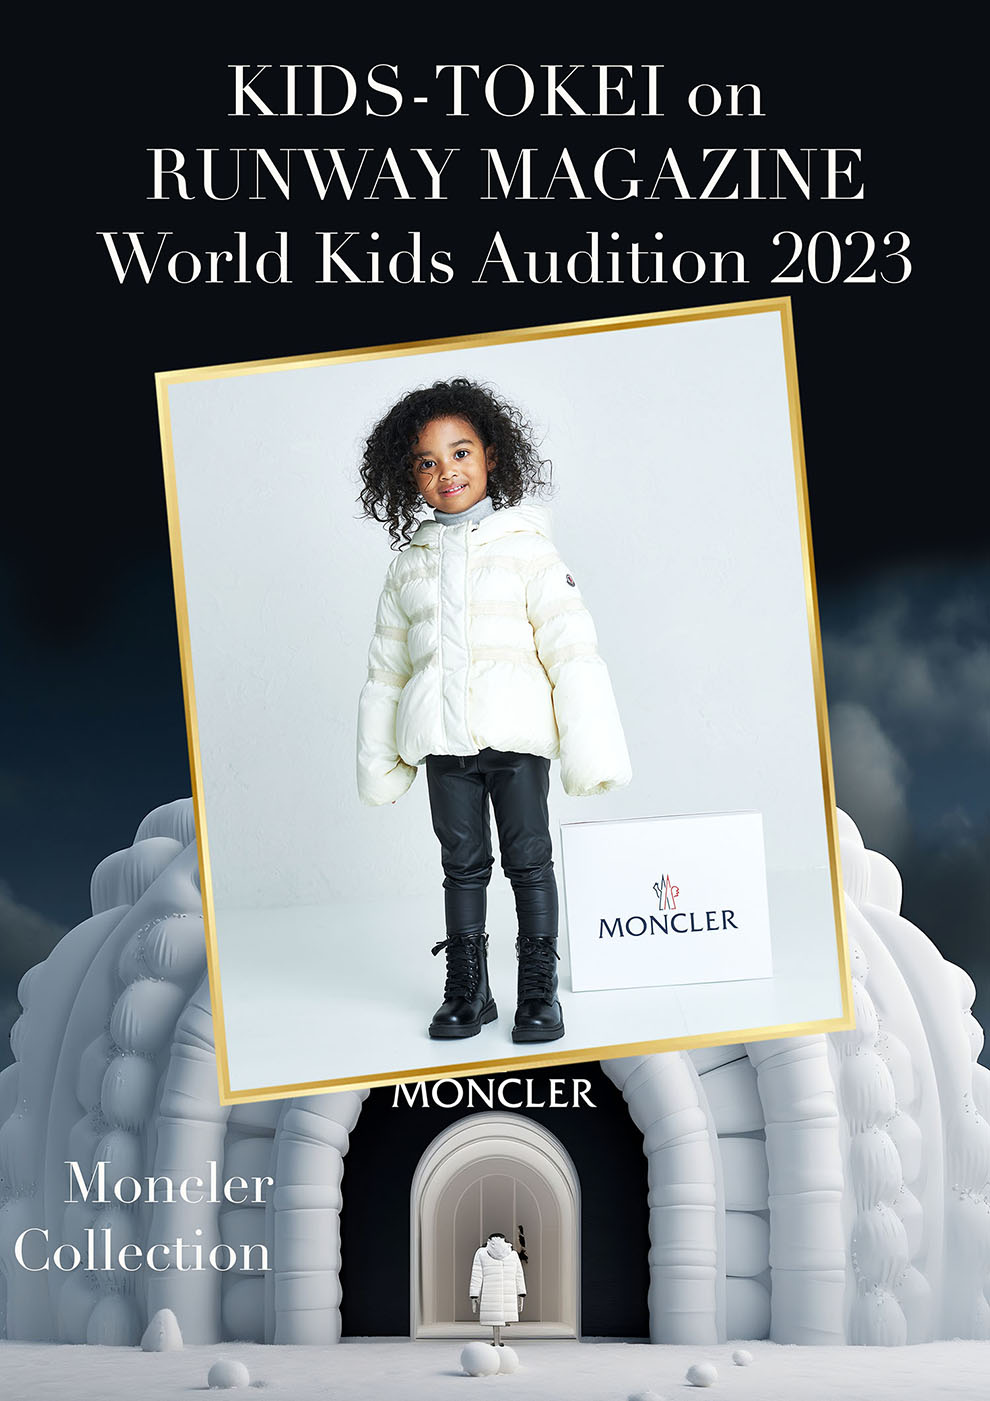 Kids-Tokei nominees Photo-competition 2023 - RUNWAY MAGAZINE ® Official